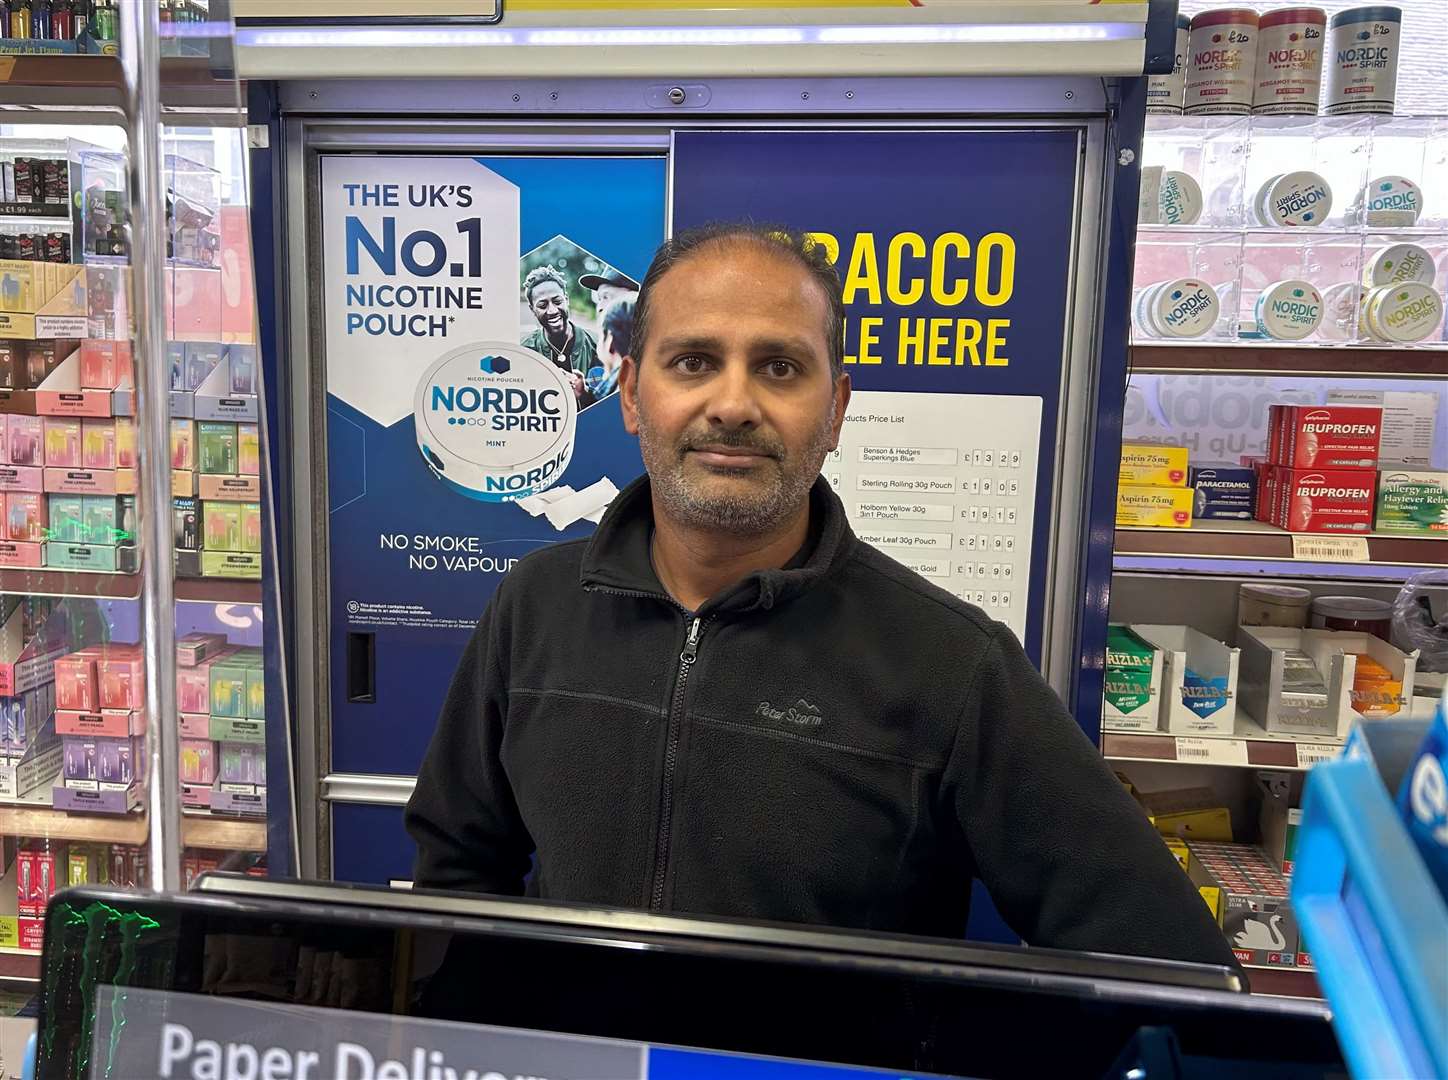 Dee Patel, who runs newsagent Bonbon, was lost £400 to £500 a day due to the Wincheap gas works